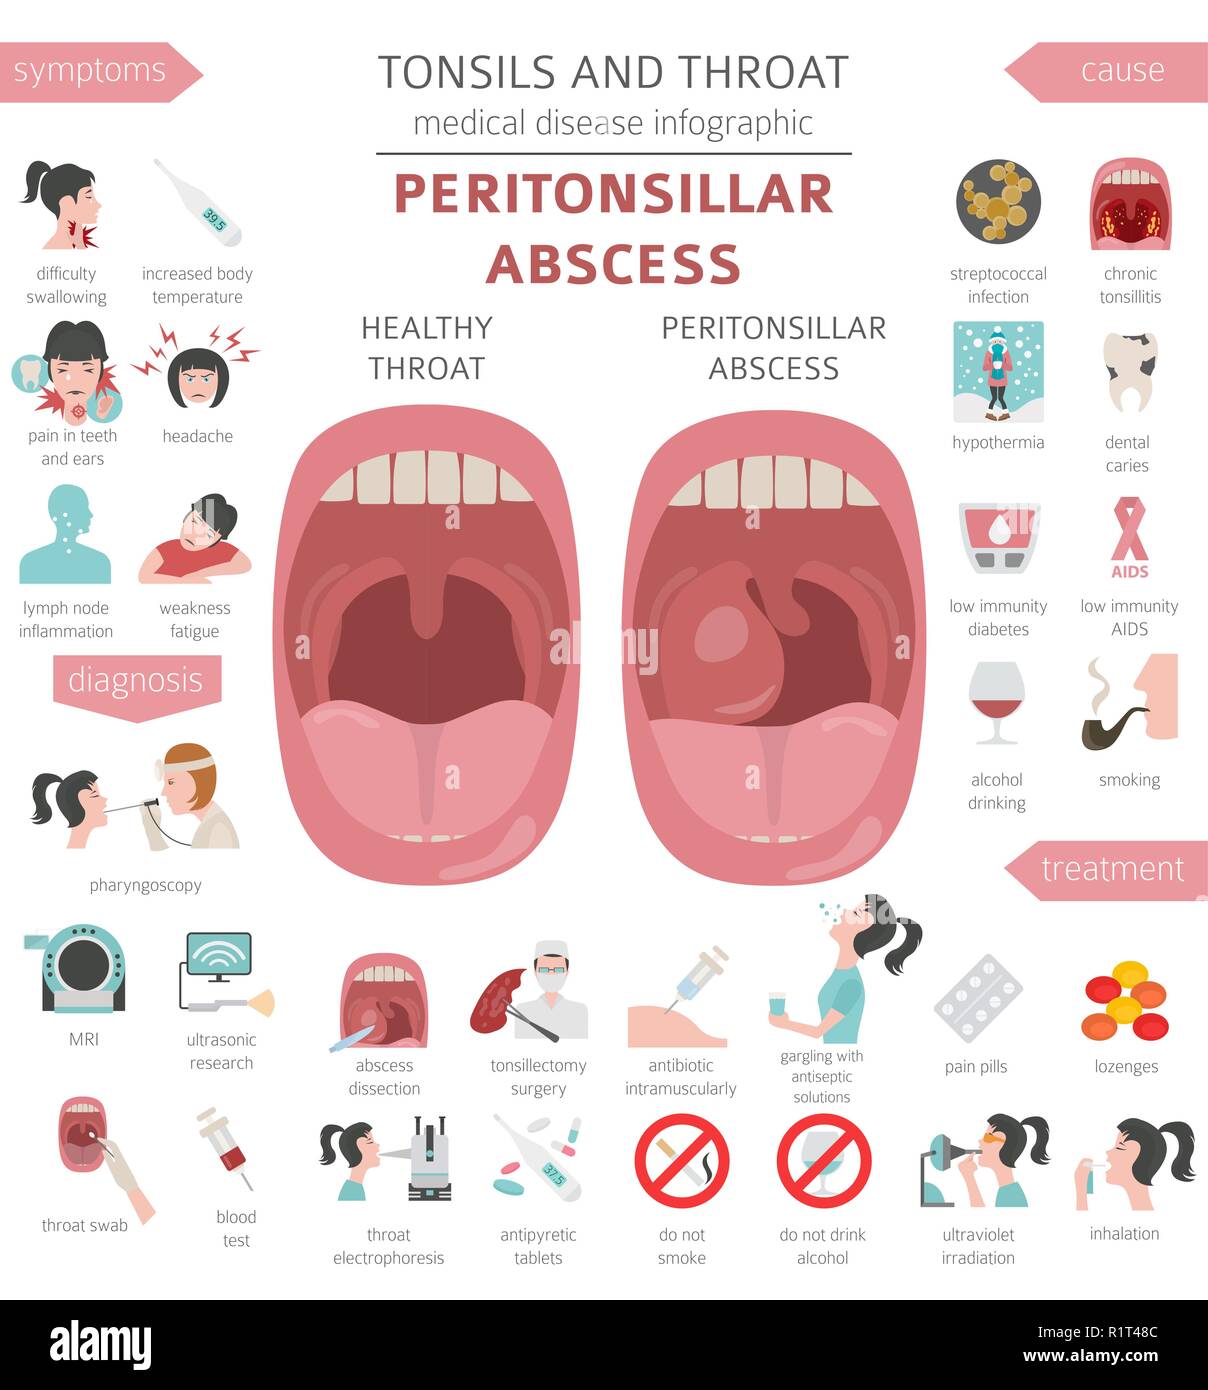 Tonsils and throat diseases. Peritonsillar abscess symptoms, treatment icon set. Medical infographic design. Vector illustration Stock Vector